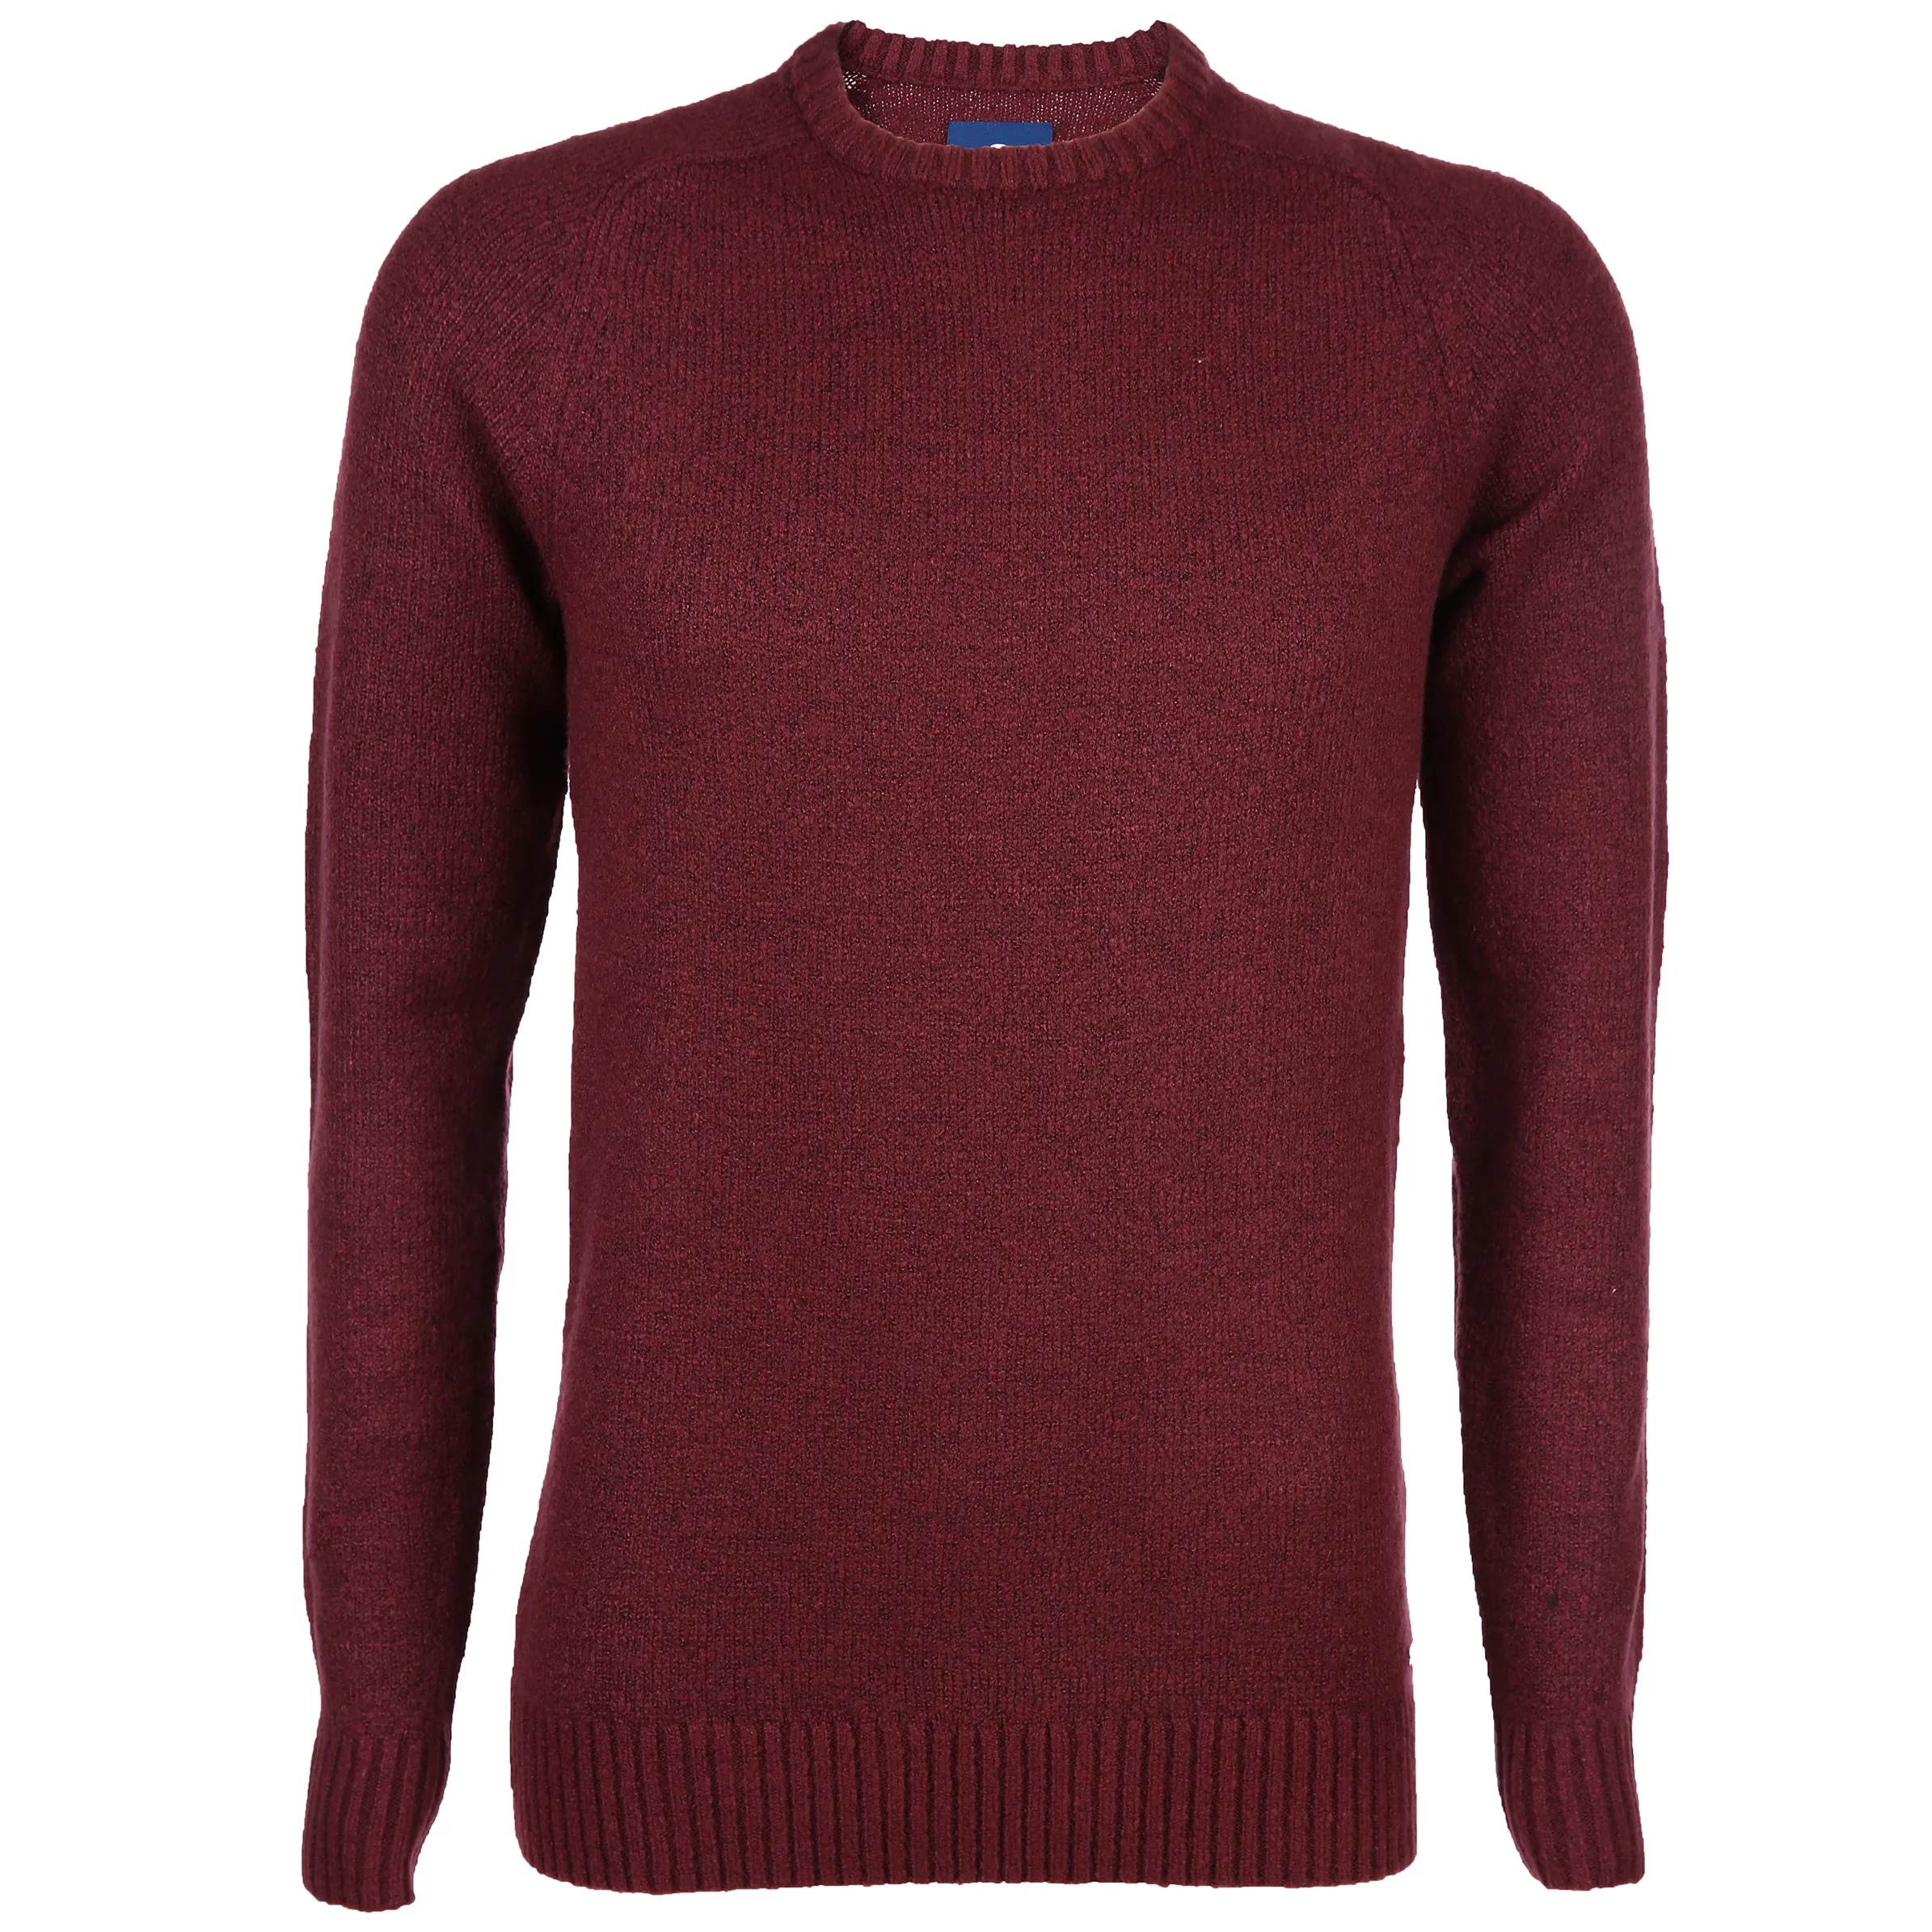 Tom Tailor 1005645 cosy knitted sweater Rot 800010 10308 1